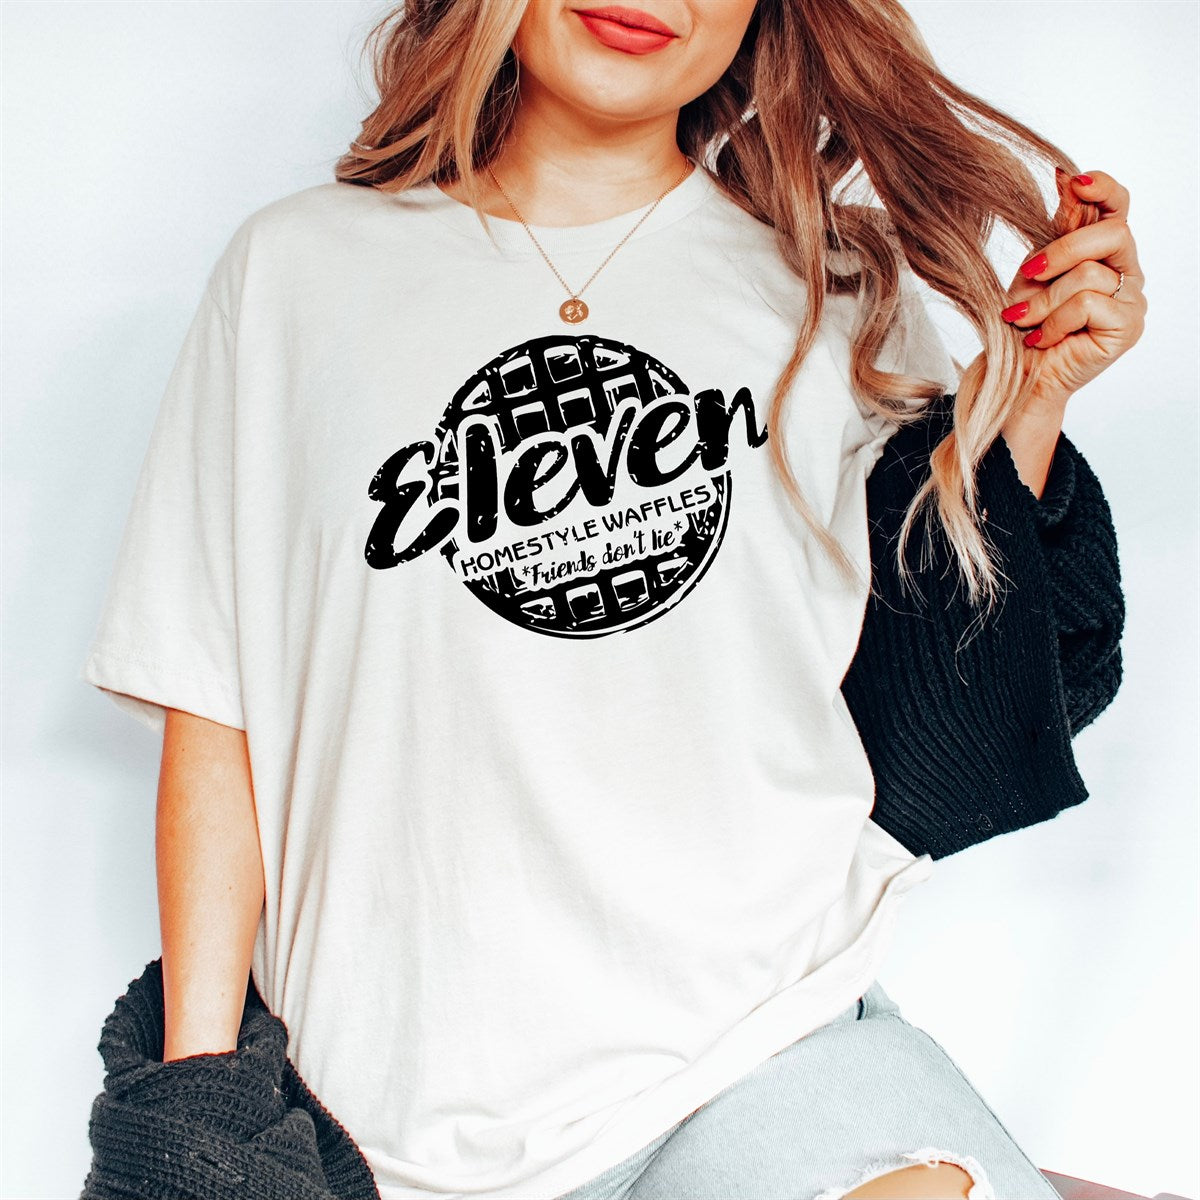 Eleven Homestyle Waffles "Friends Don't Lie" Tee